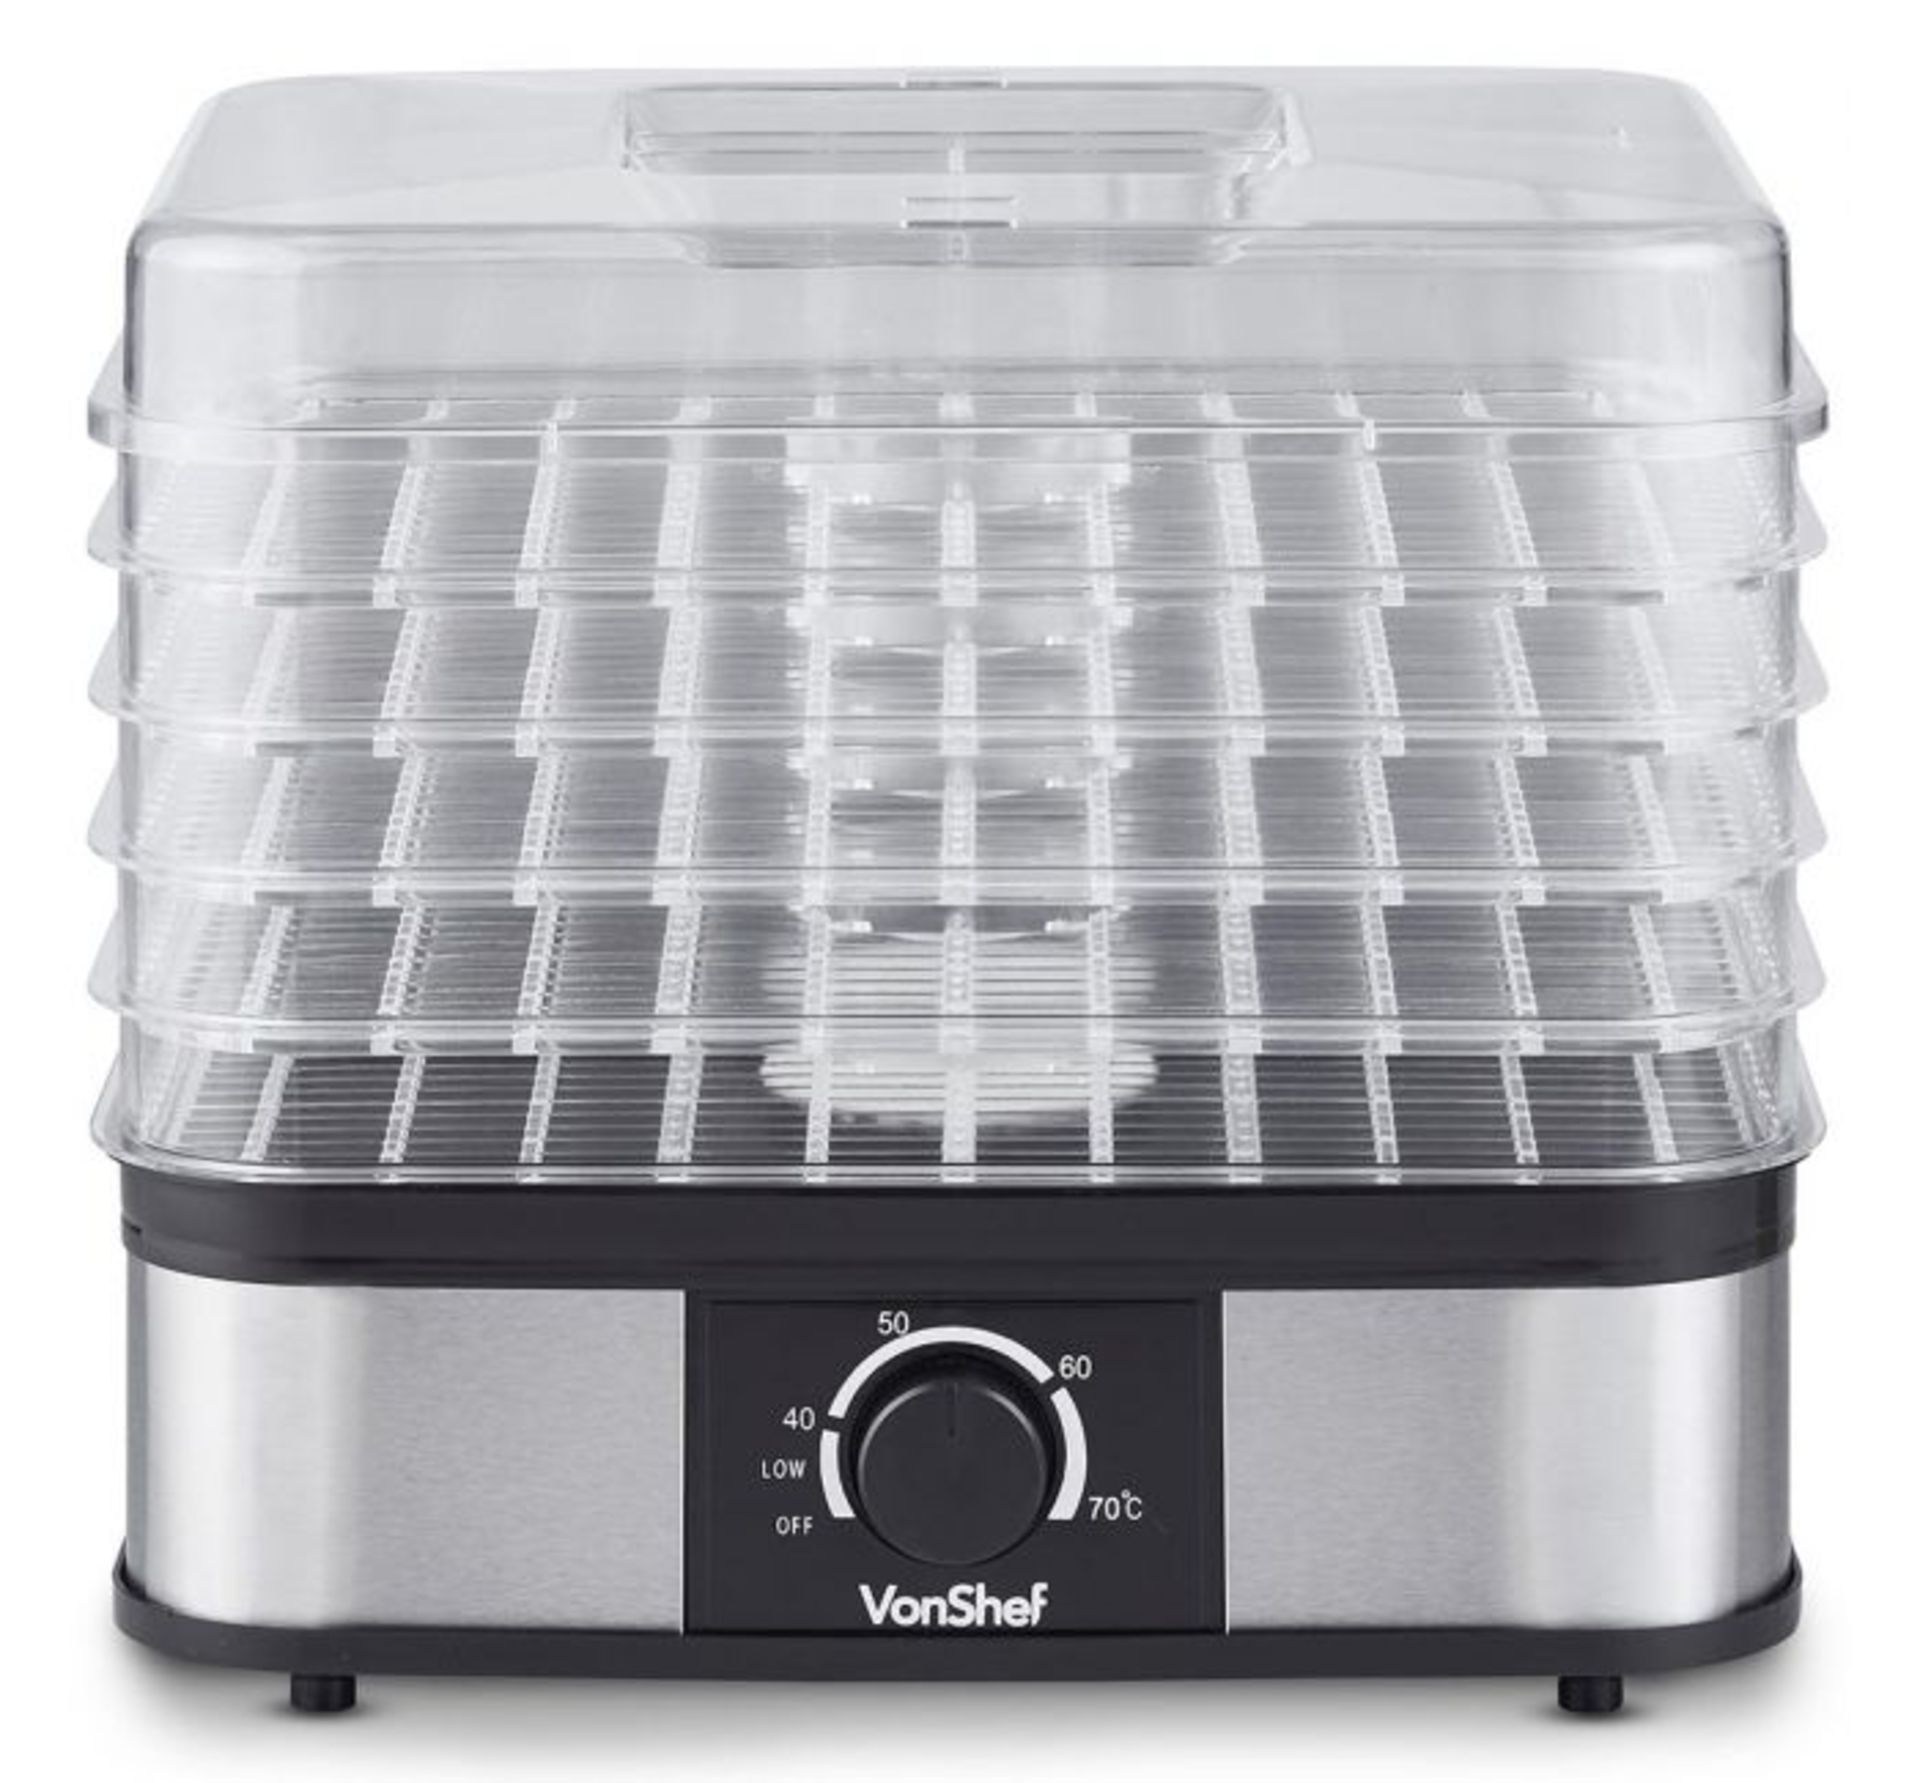 (AP14) 5 Tier Food Dehydrator Ideal for creating beef jerky, banana chips, dried fruits and mo... - Image 3 of 3